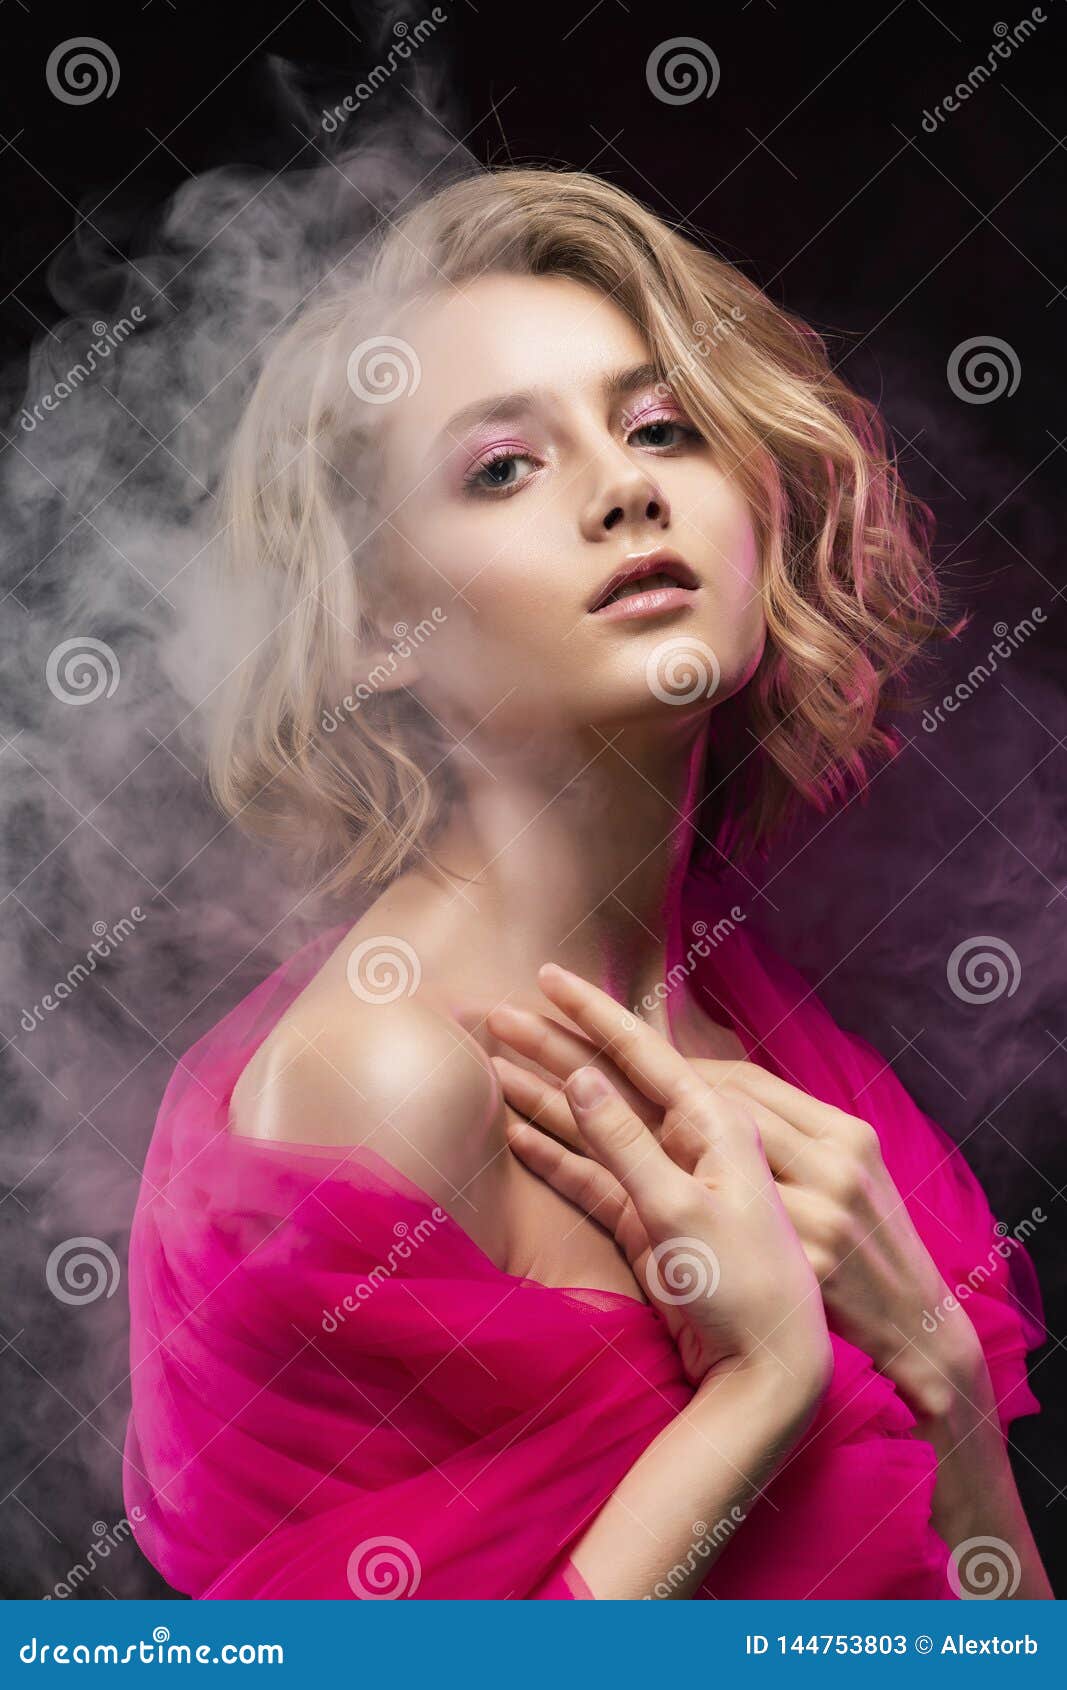 Beautiful Young Blonde Girl With Naked Oily Shoulders And Curly Hair Wrapped In A Pink Veil Posing On A Pink Gradient Background Stock Image Image Of Makeup Fashion